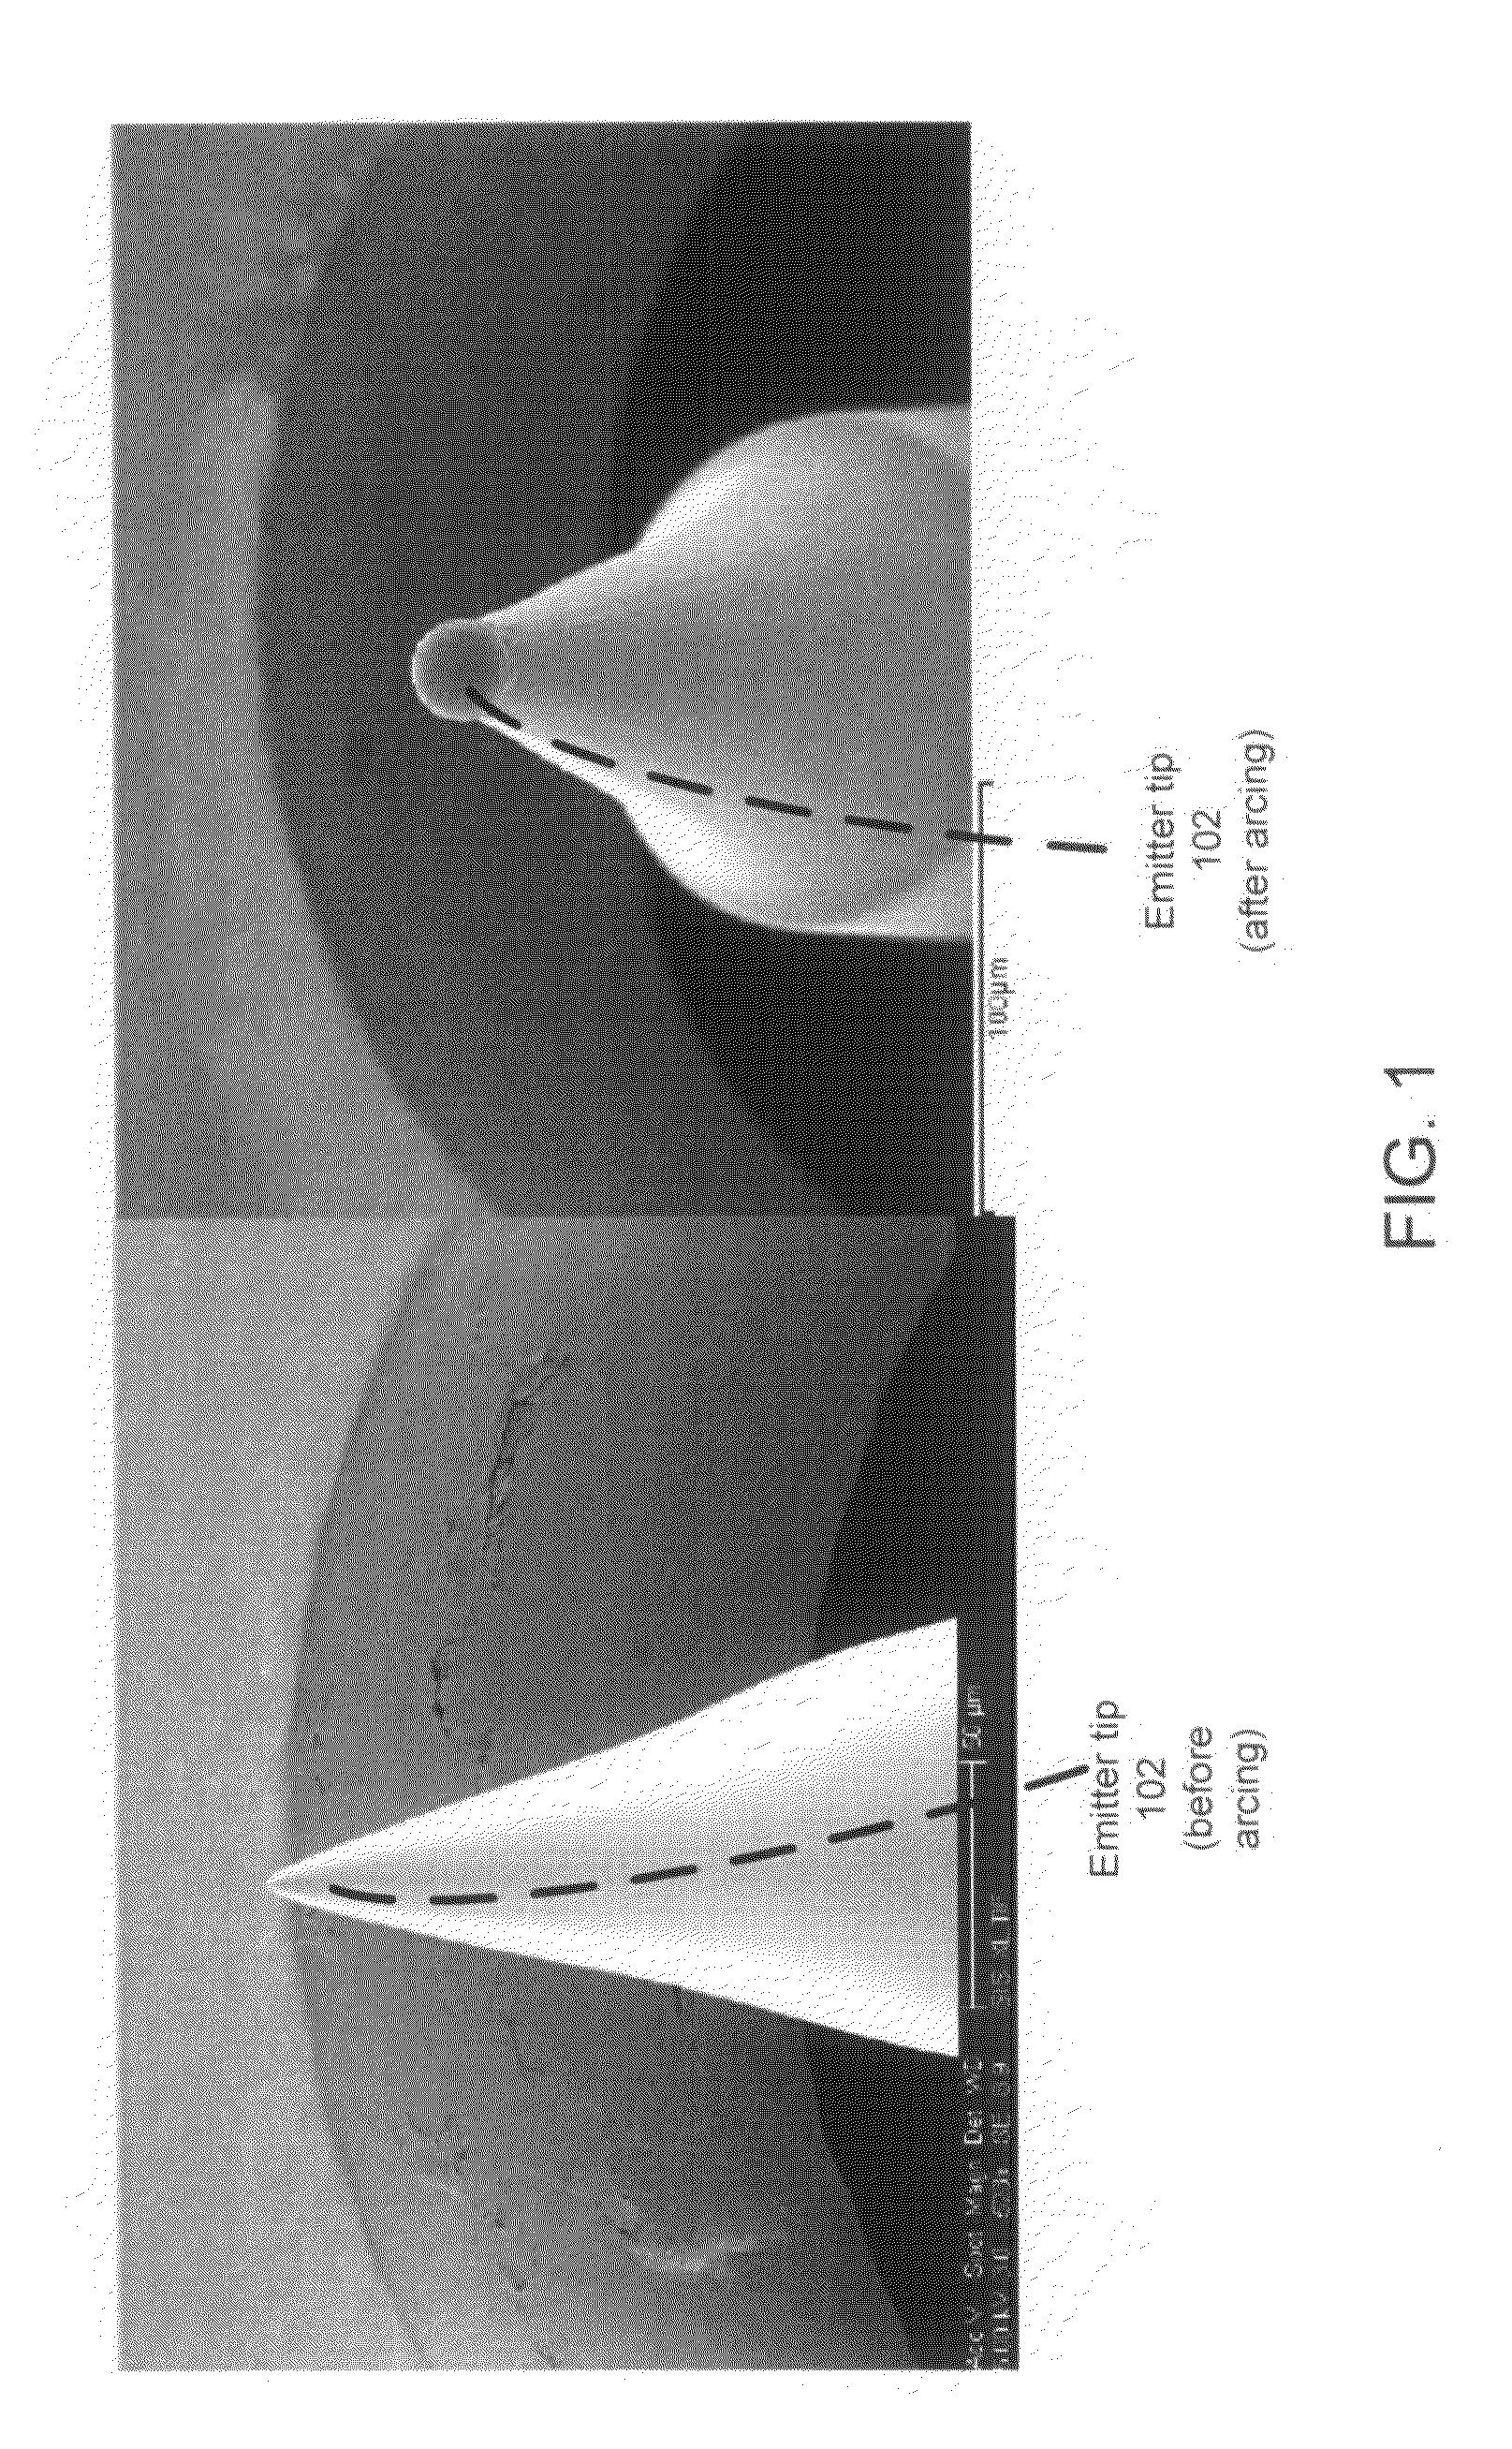 Thermal field emission electron gun with reduced arcing